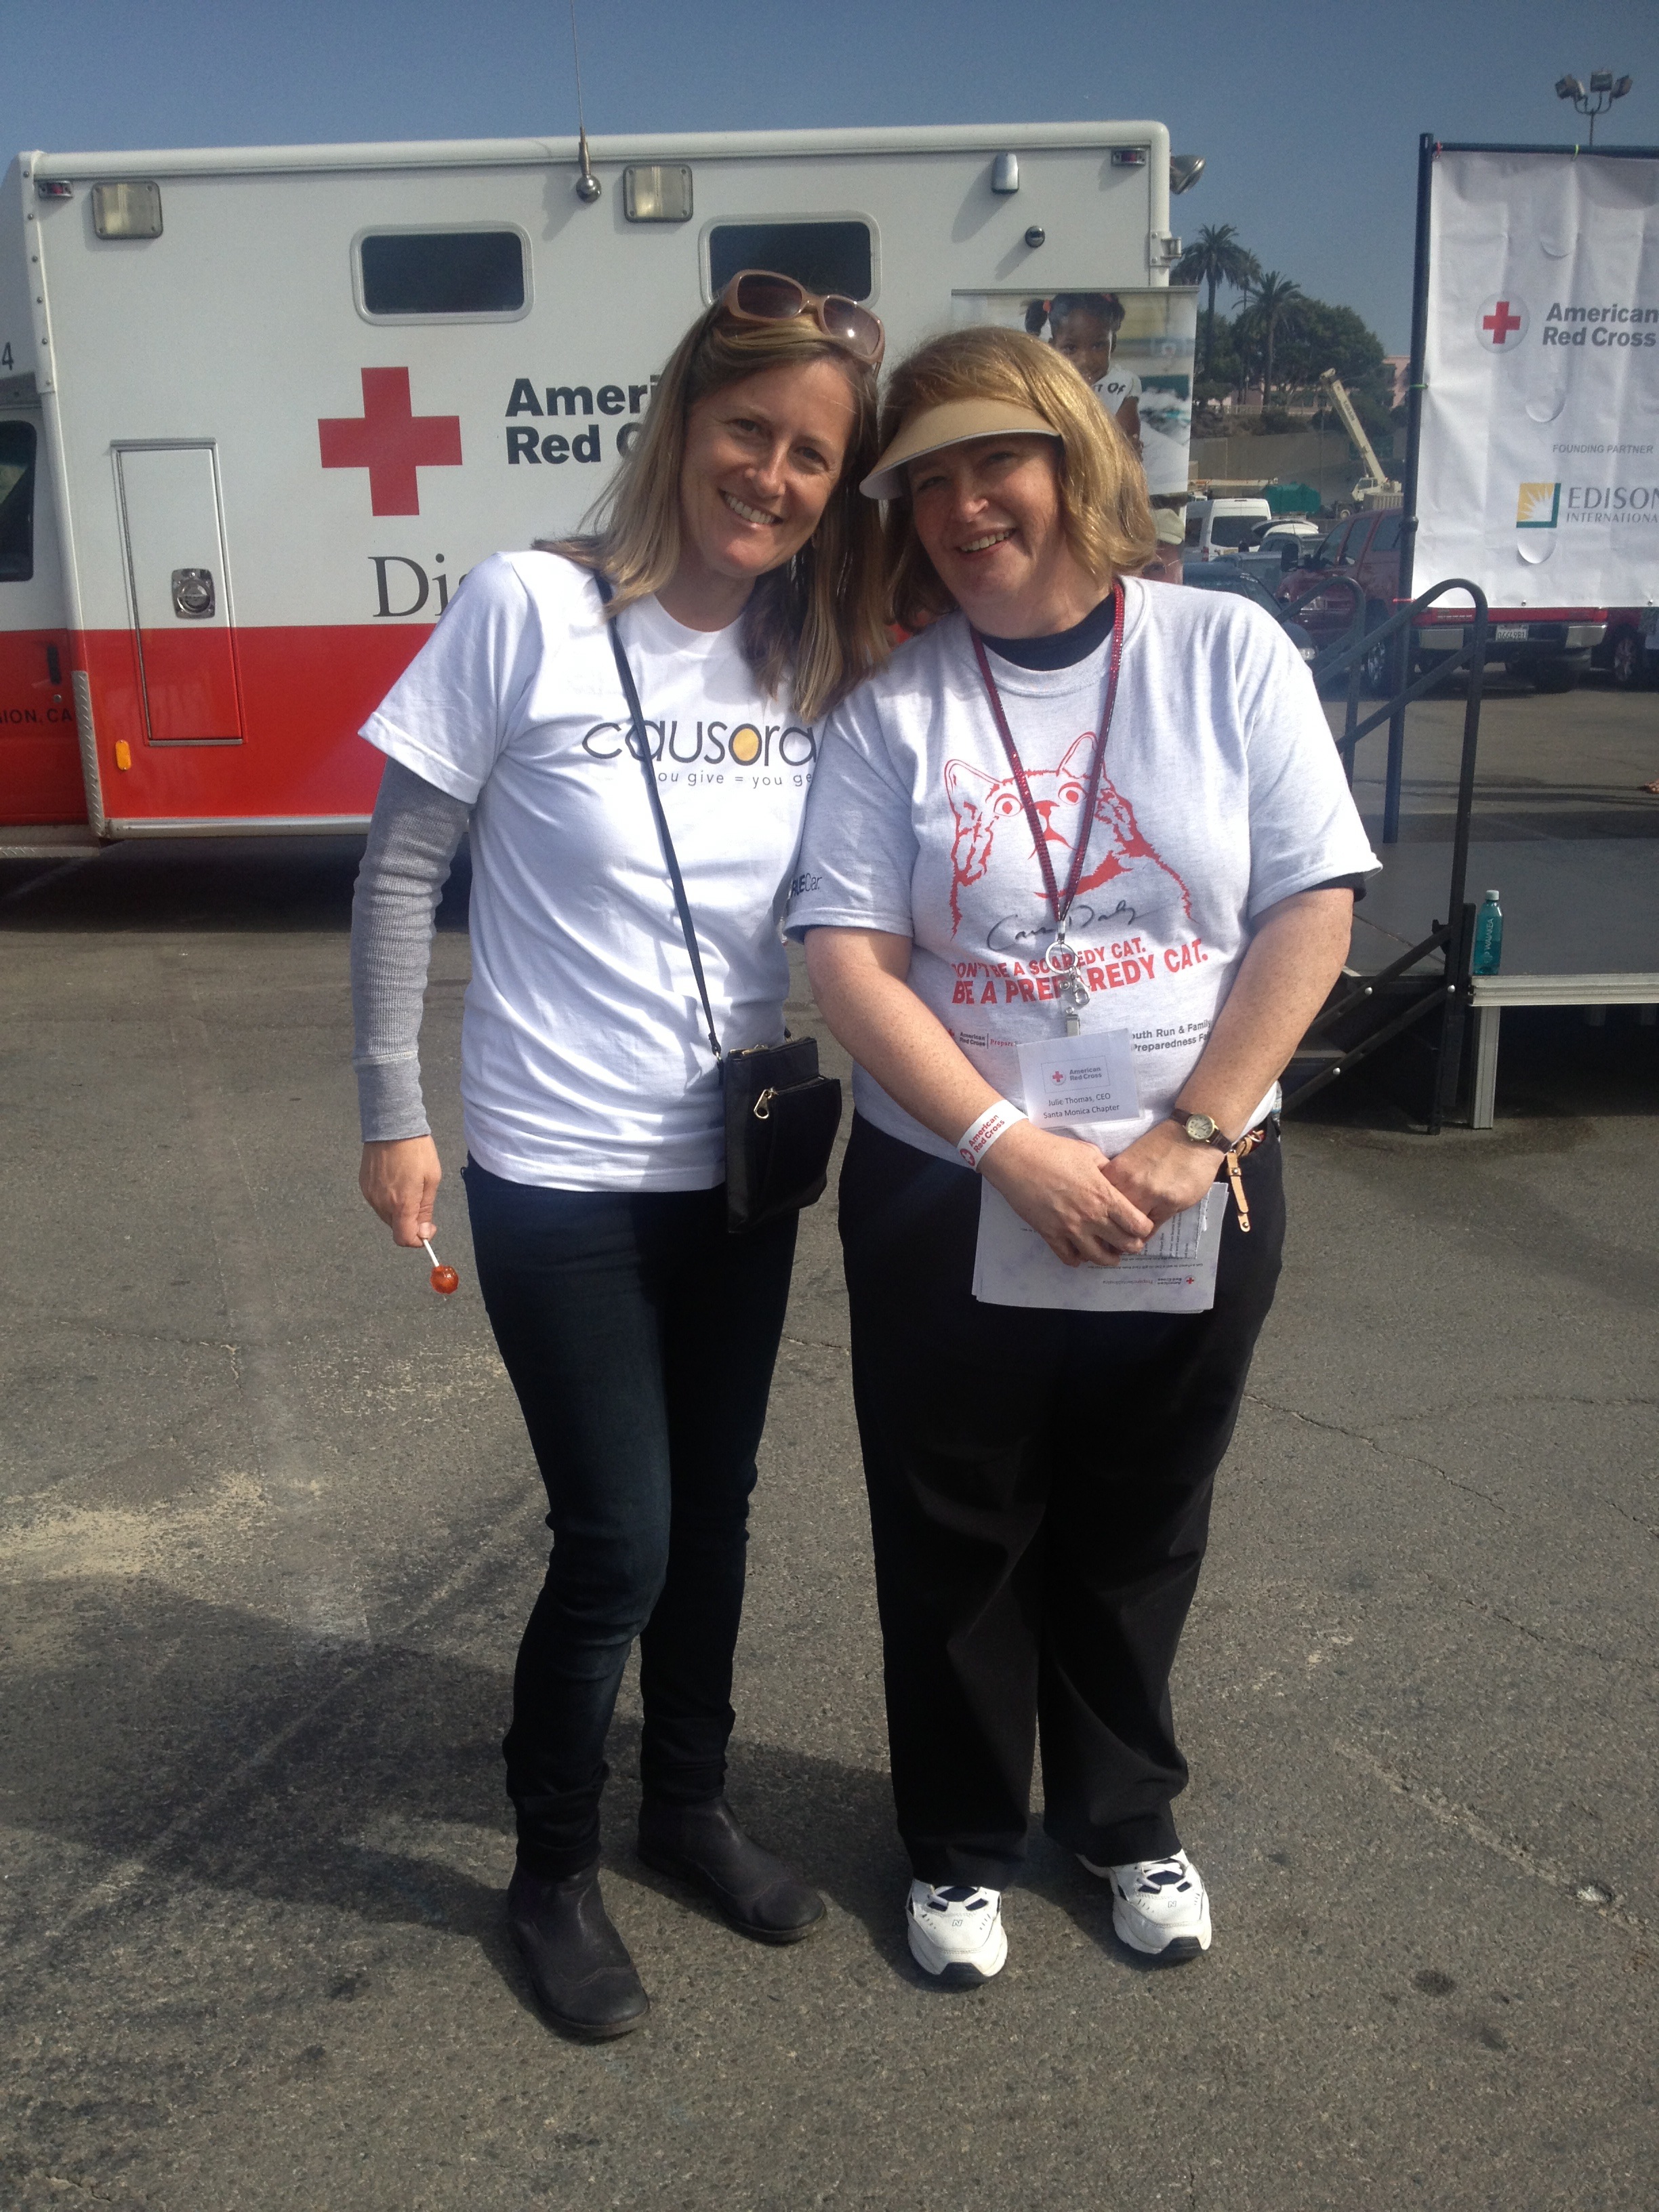 Julie Thomas, CEO of the American Red Cross of Santa Monica with Justine Lassoff, VP at Causora, at the PrepareSantaMonica event featuring honorary chair Carson Daly.